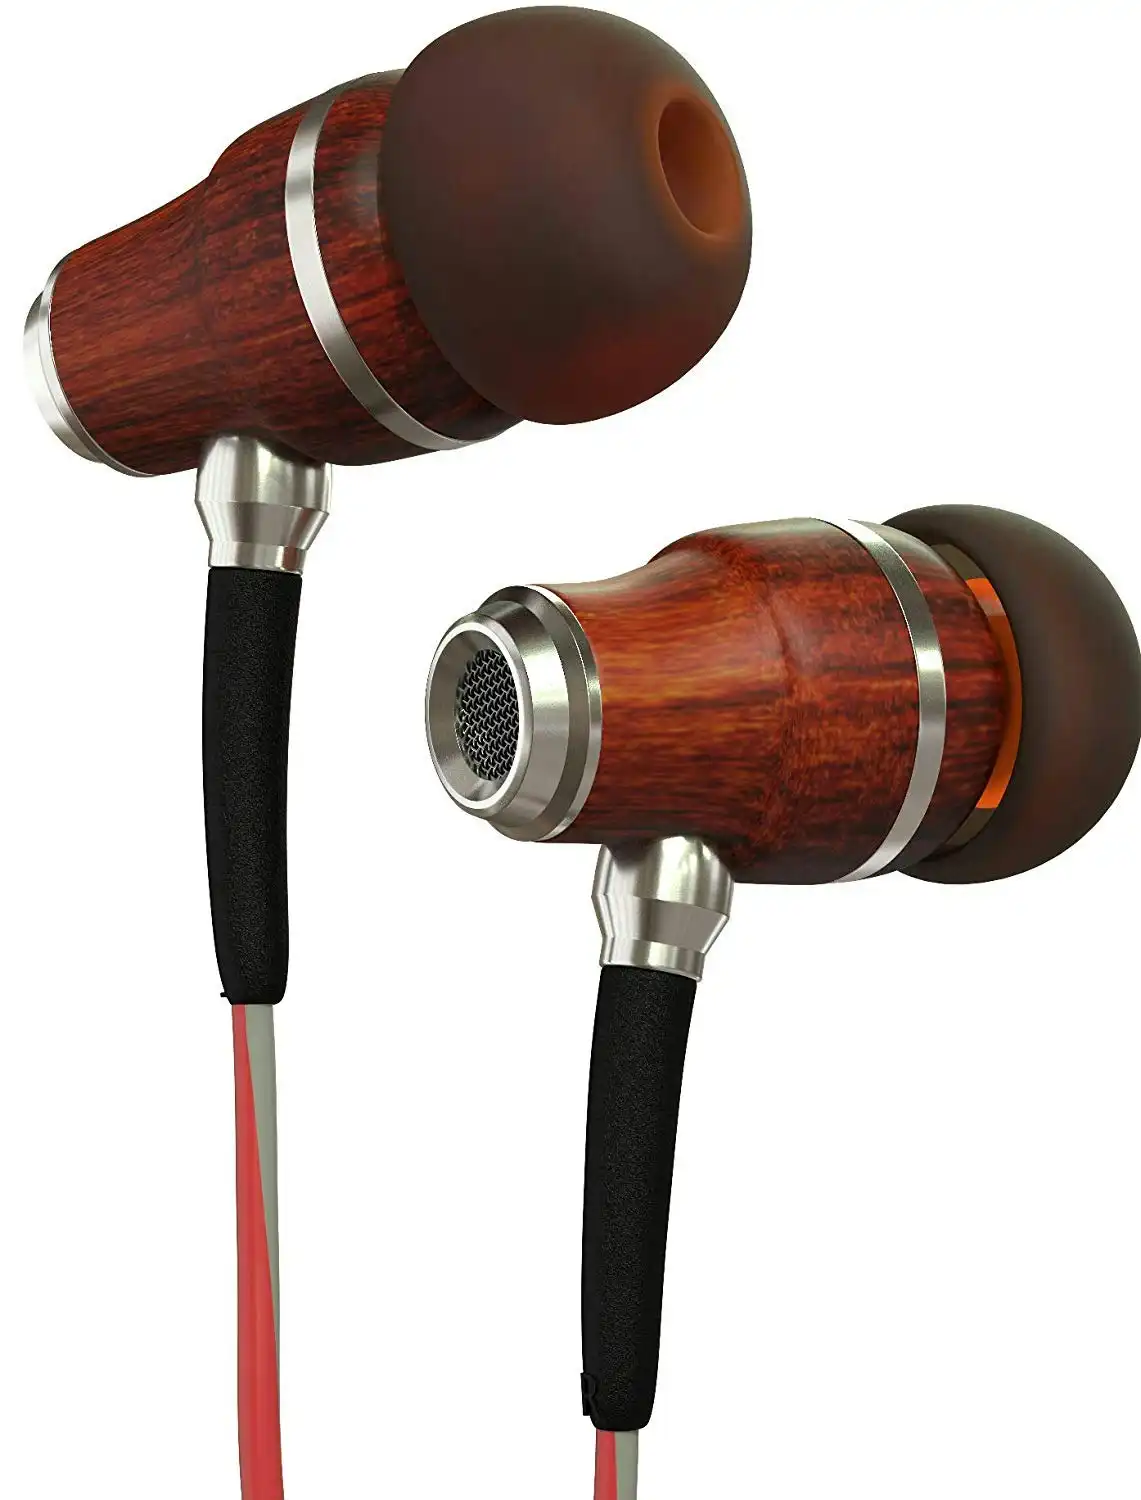 Symphonized NRG 3.0 Earbuds Headphones, Wood in-Ear Noise-isolating Earphones, Balanced Bass Driven Sound with Mic & Volume Control.